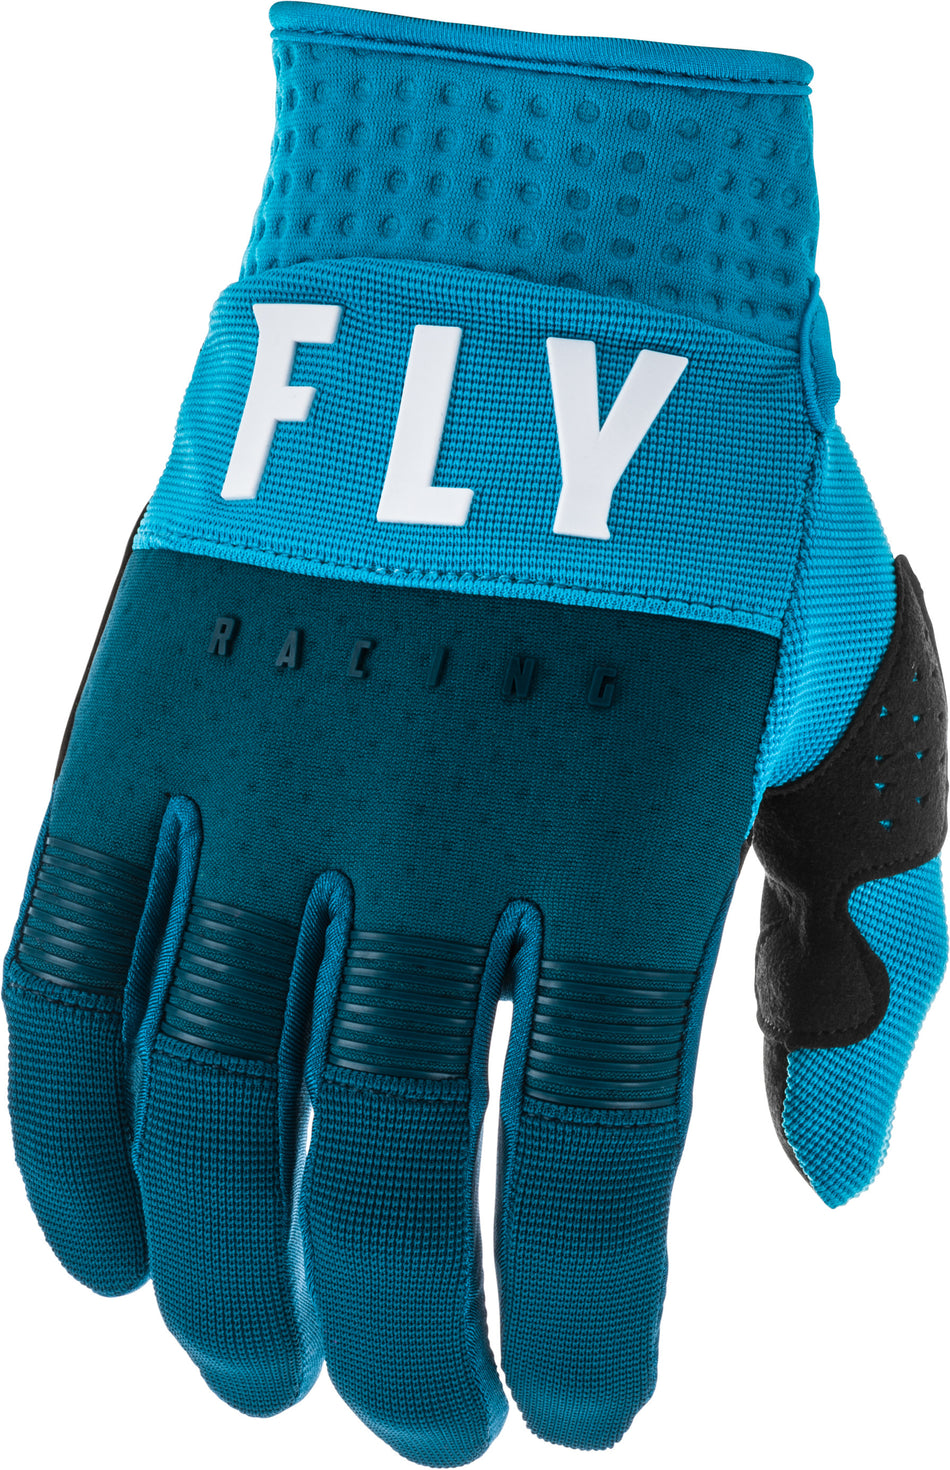 FLY RACING F-16 Gloves Navy/Blue/White Sz 09 373-91109